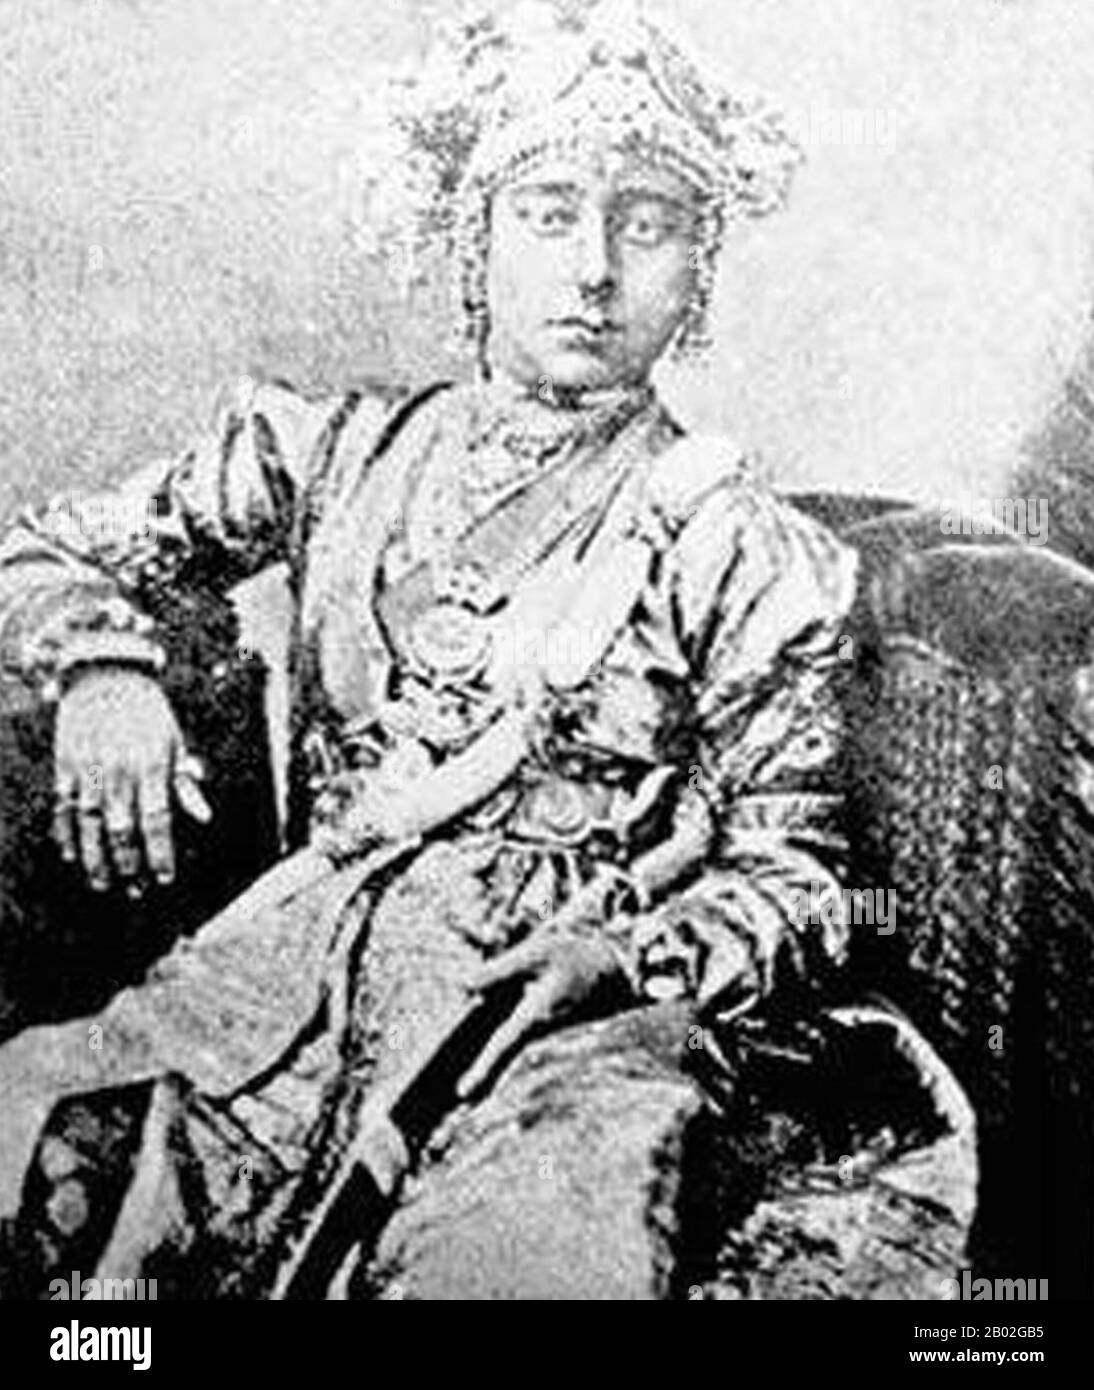 Lakshmi Bai, the Rani of Jhansi (c.19 November 1835 – 17 June 1858, (Marathi- झाशीची राणी लक्ष्मीबाई) was the queen of the Maratha-ruled princely state of Jhansi, situated in the north-central part of India.  She was one of the leading figures of the Indian Rebellion of 1857 and a symbol of resistance to the rule of the British East India Company in the subcontinent. Stock Photo